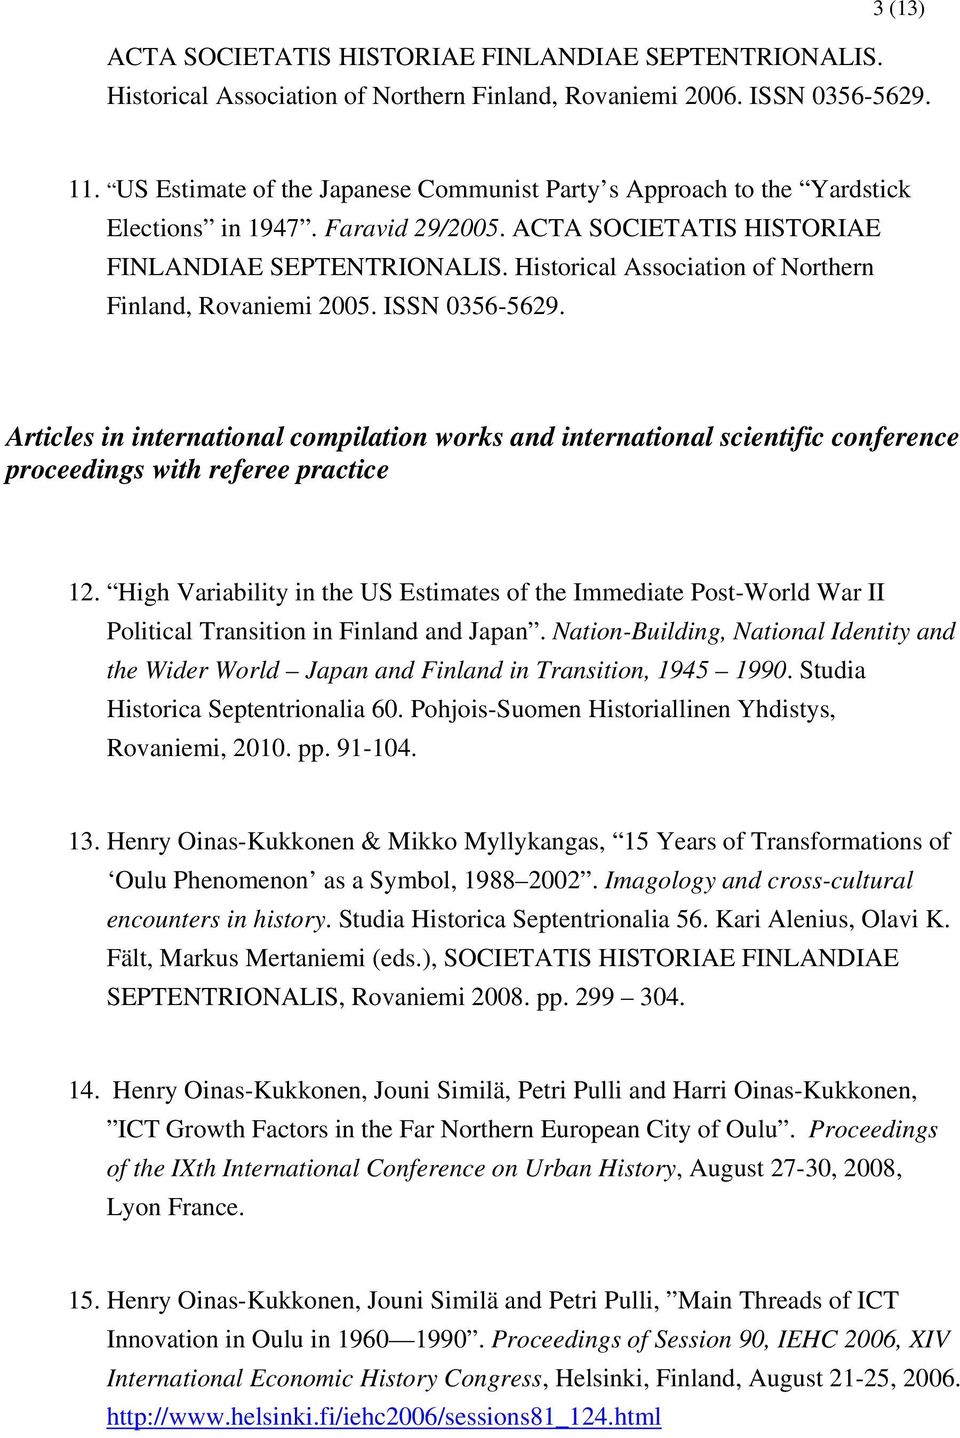 Historical Association of Northern Finland, Rovaniemi 2005. ISSN 0356-5629. Articles in international compilation works and international scientific conference proceedings with referee practice 12.